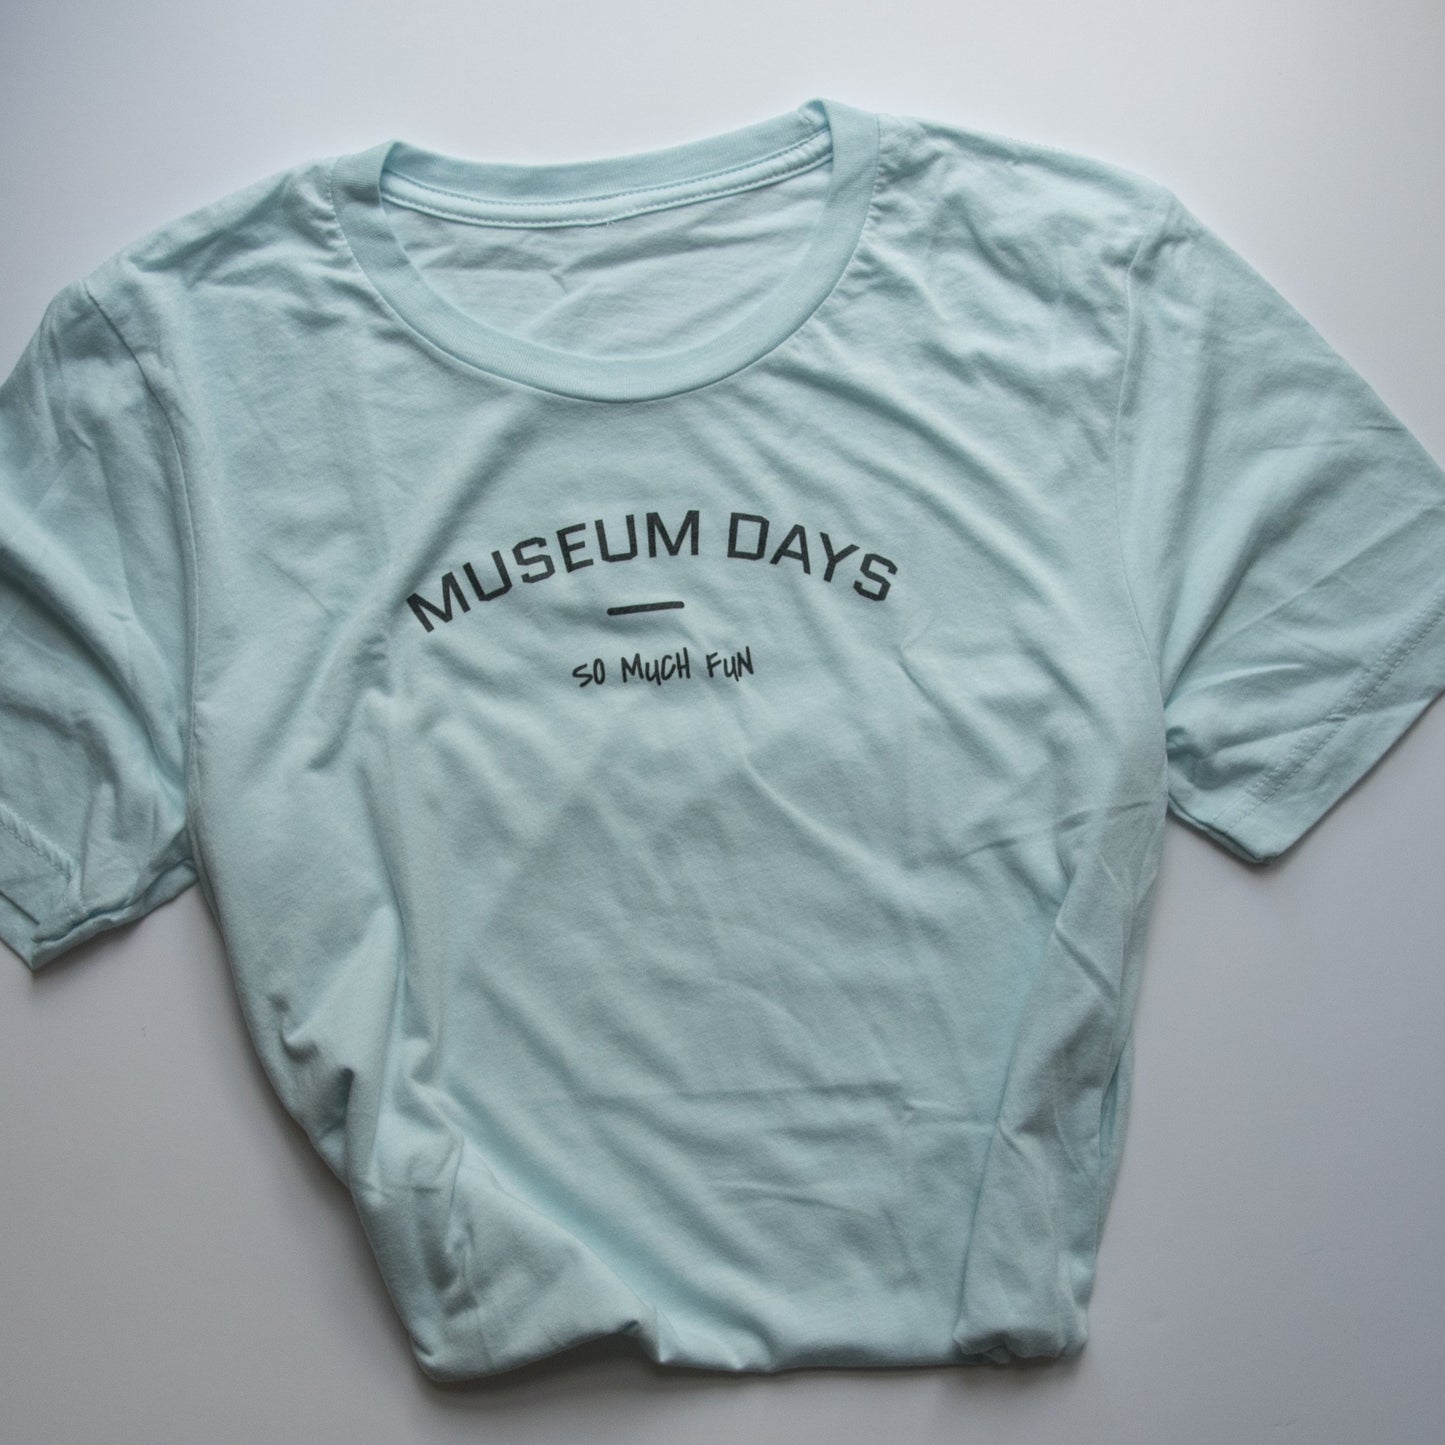 MUSEUM DAYS SO MUCH FUN - Short Sleeve Adult Tee - 3 COLORS! - Little Mate Adventures 